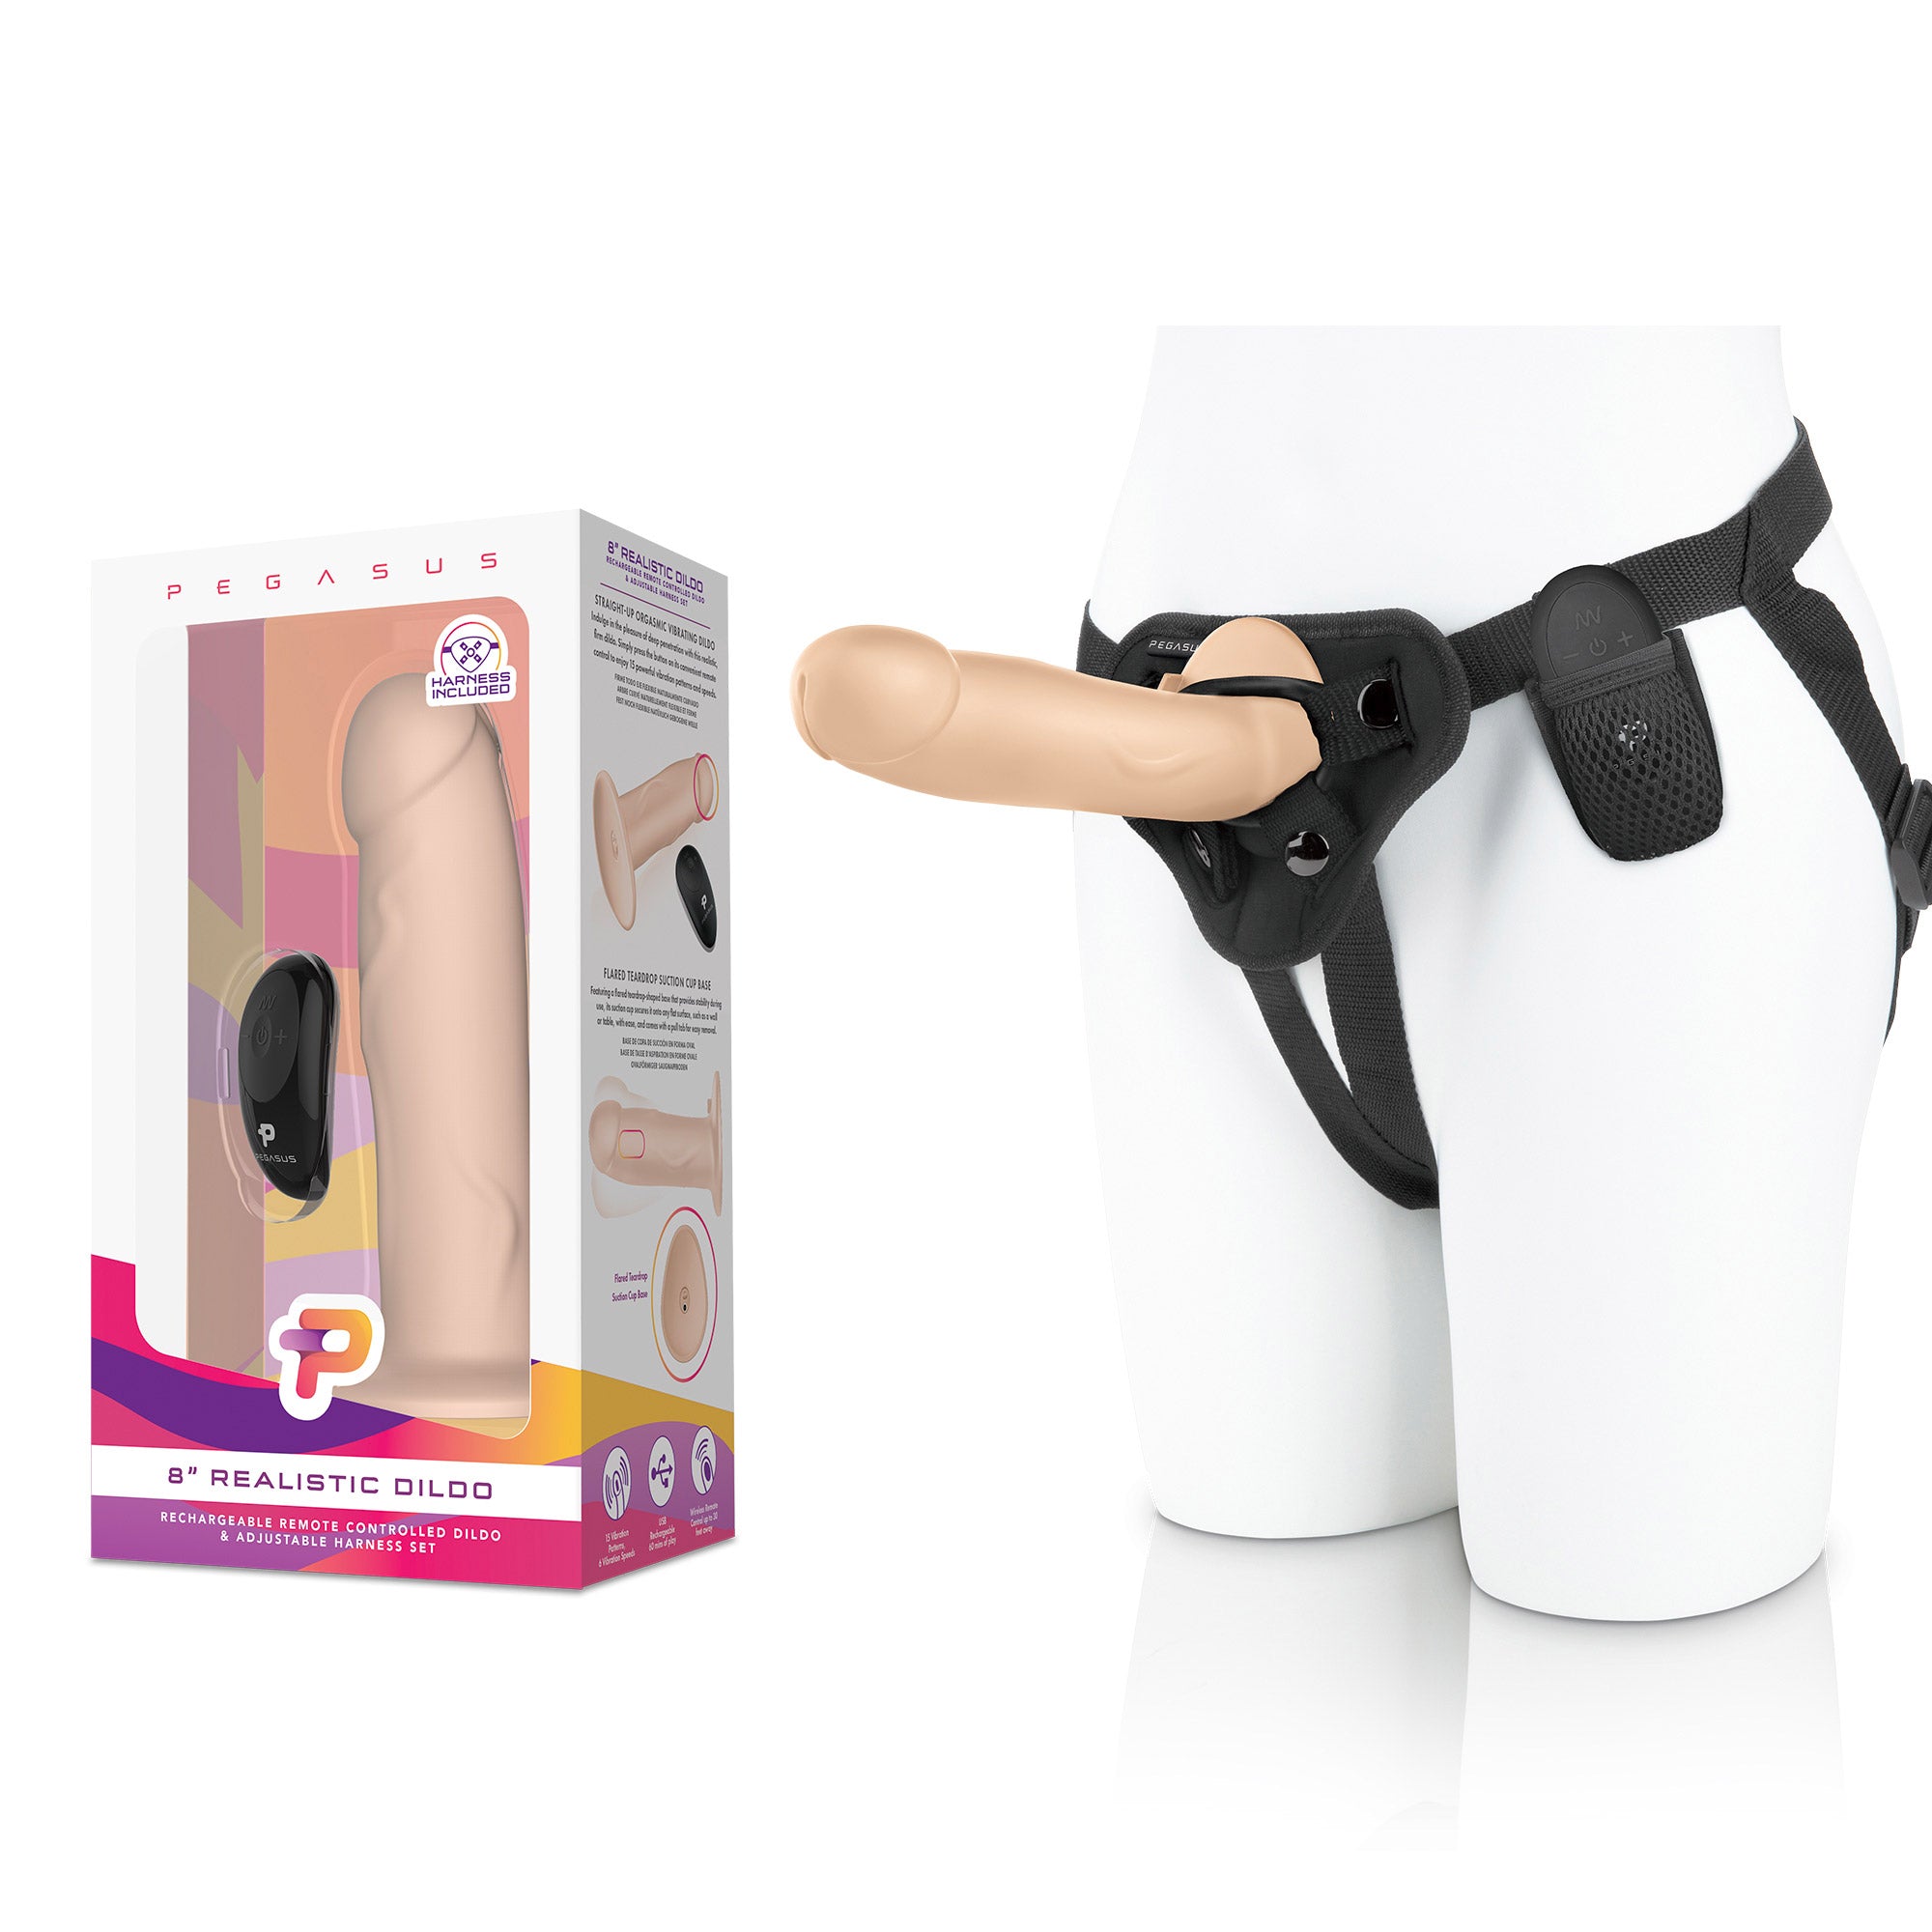 Packaging of Pegasus 8" Realistic Silicone Vibrating Pegging Dildo with Remote Control and Adjustable Harness at glastoy.com